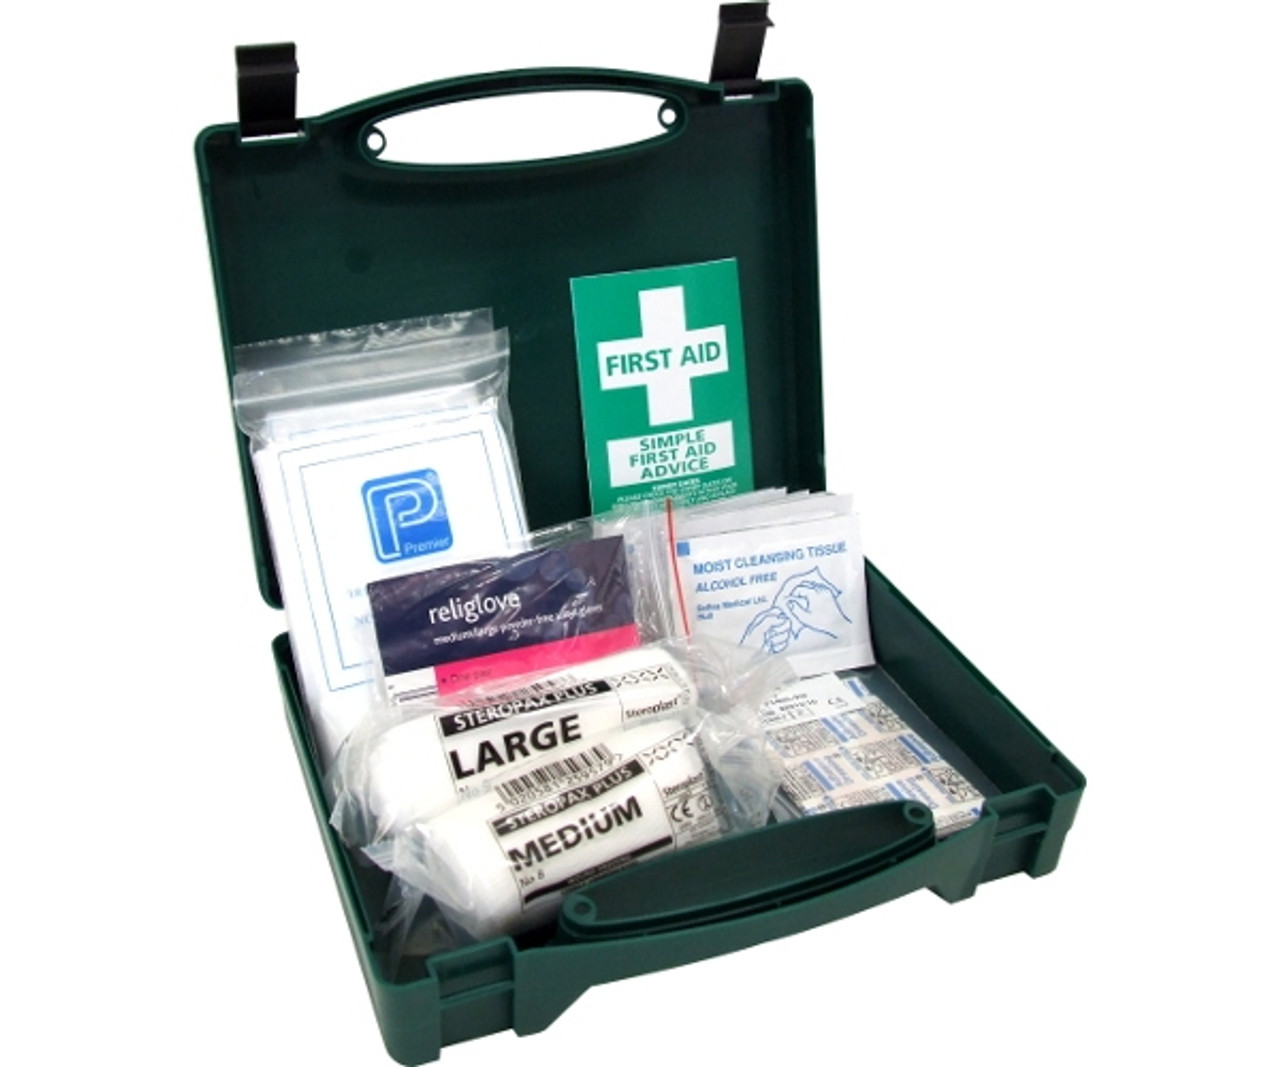 First Aid Kit Green Box HS3 Traditional 50 Person - Hunt Office UK